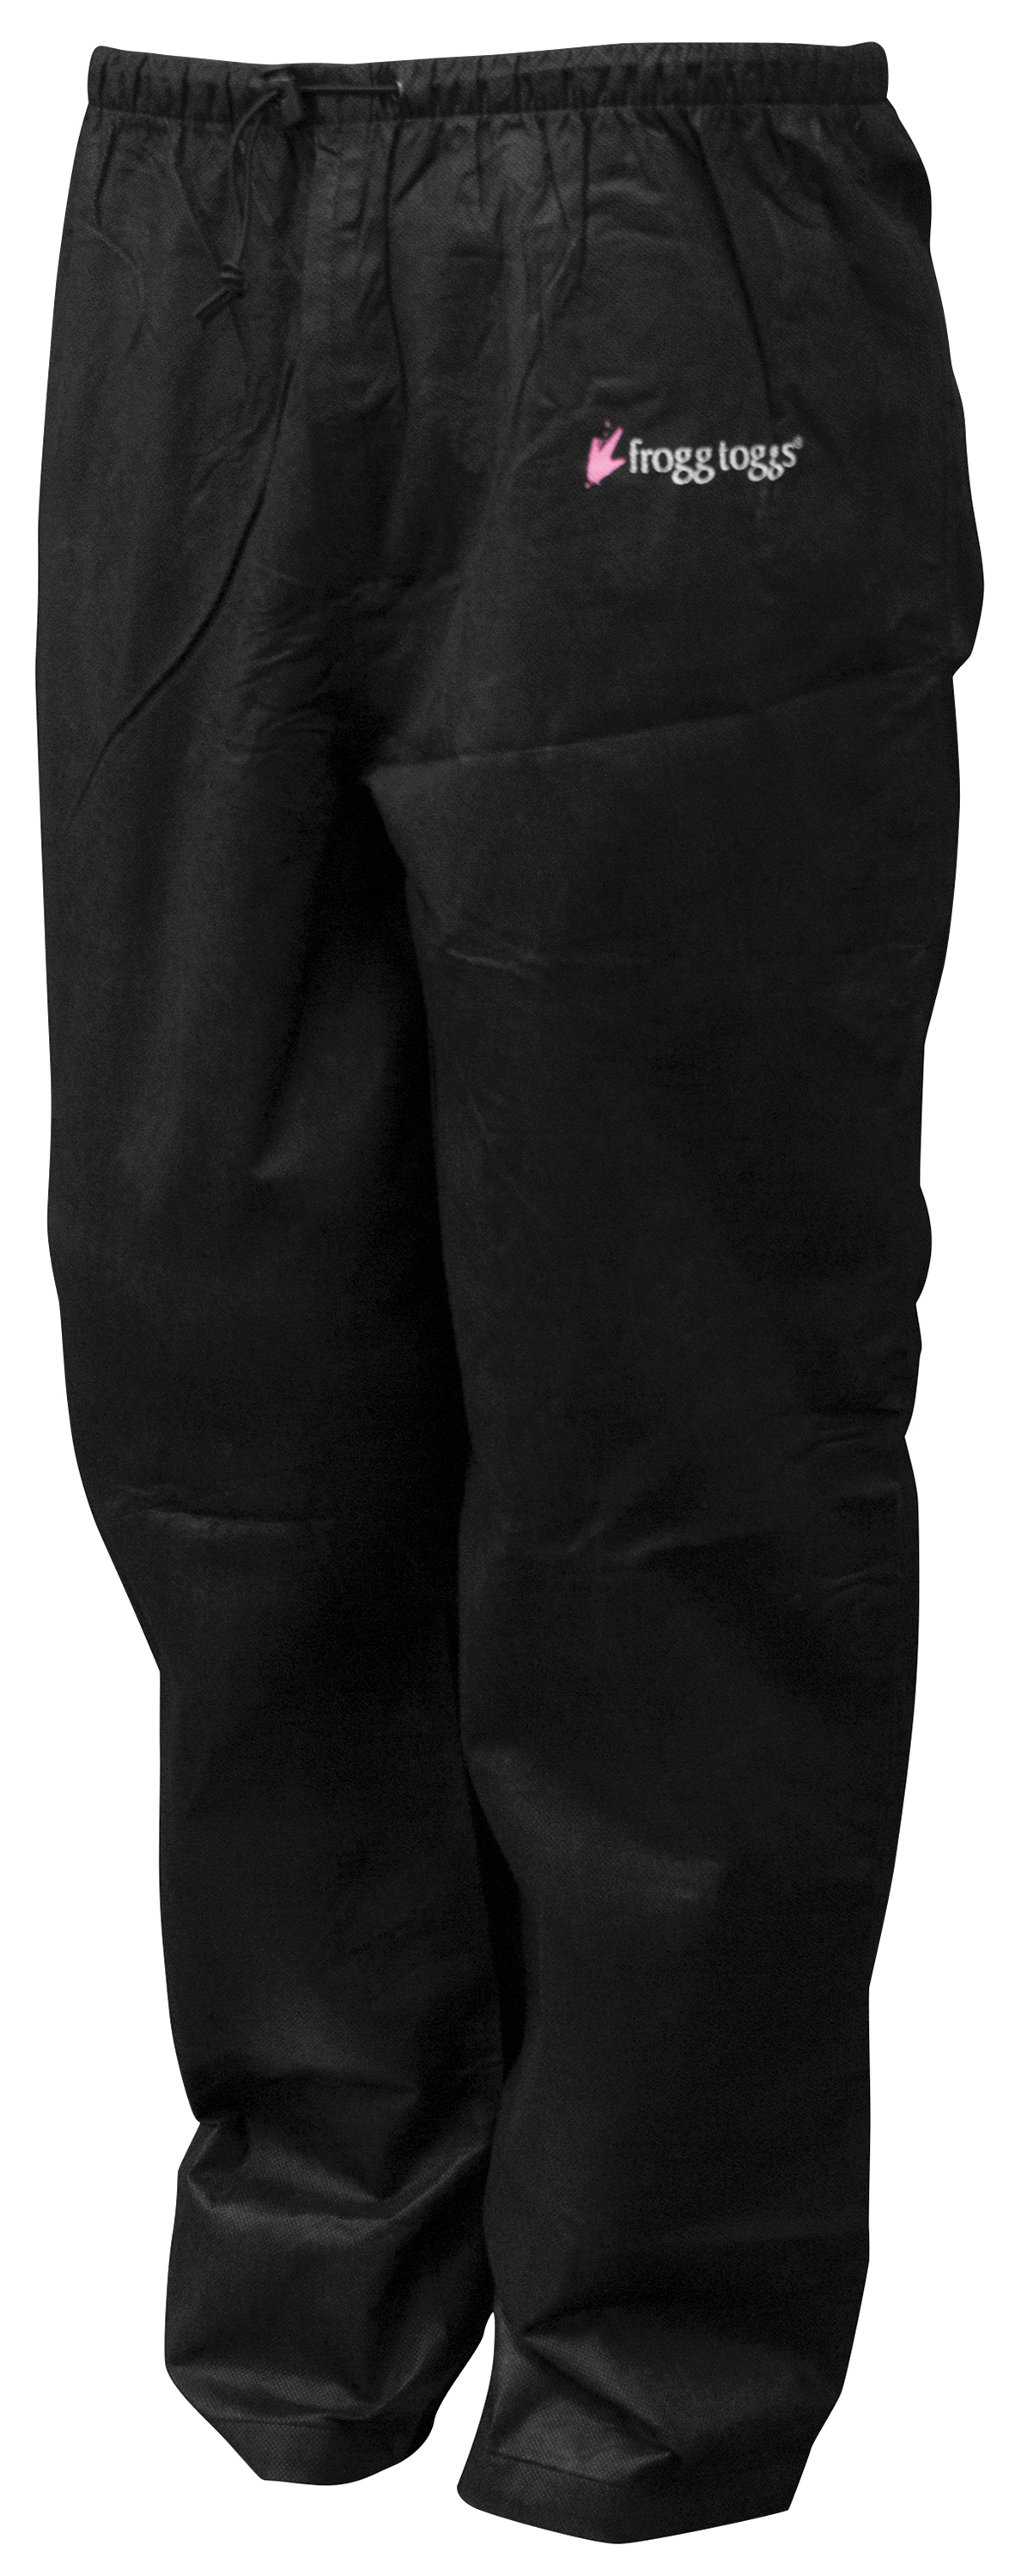 Frogg Toggs Women's Classic All-Purpose Suit | Cherry Jacket / Black Pant | Size SM - image 3 of 9